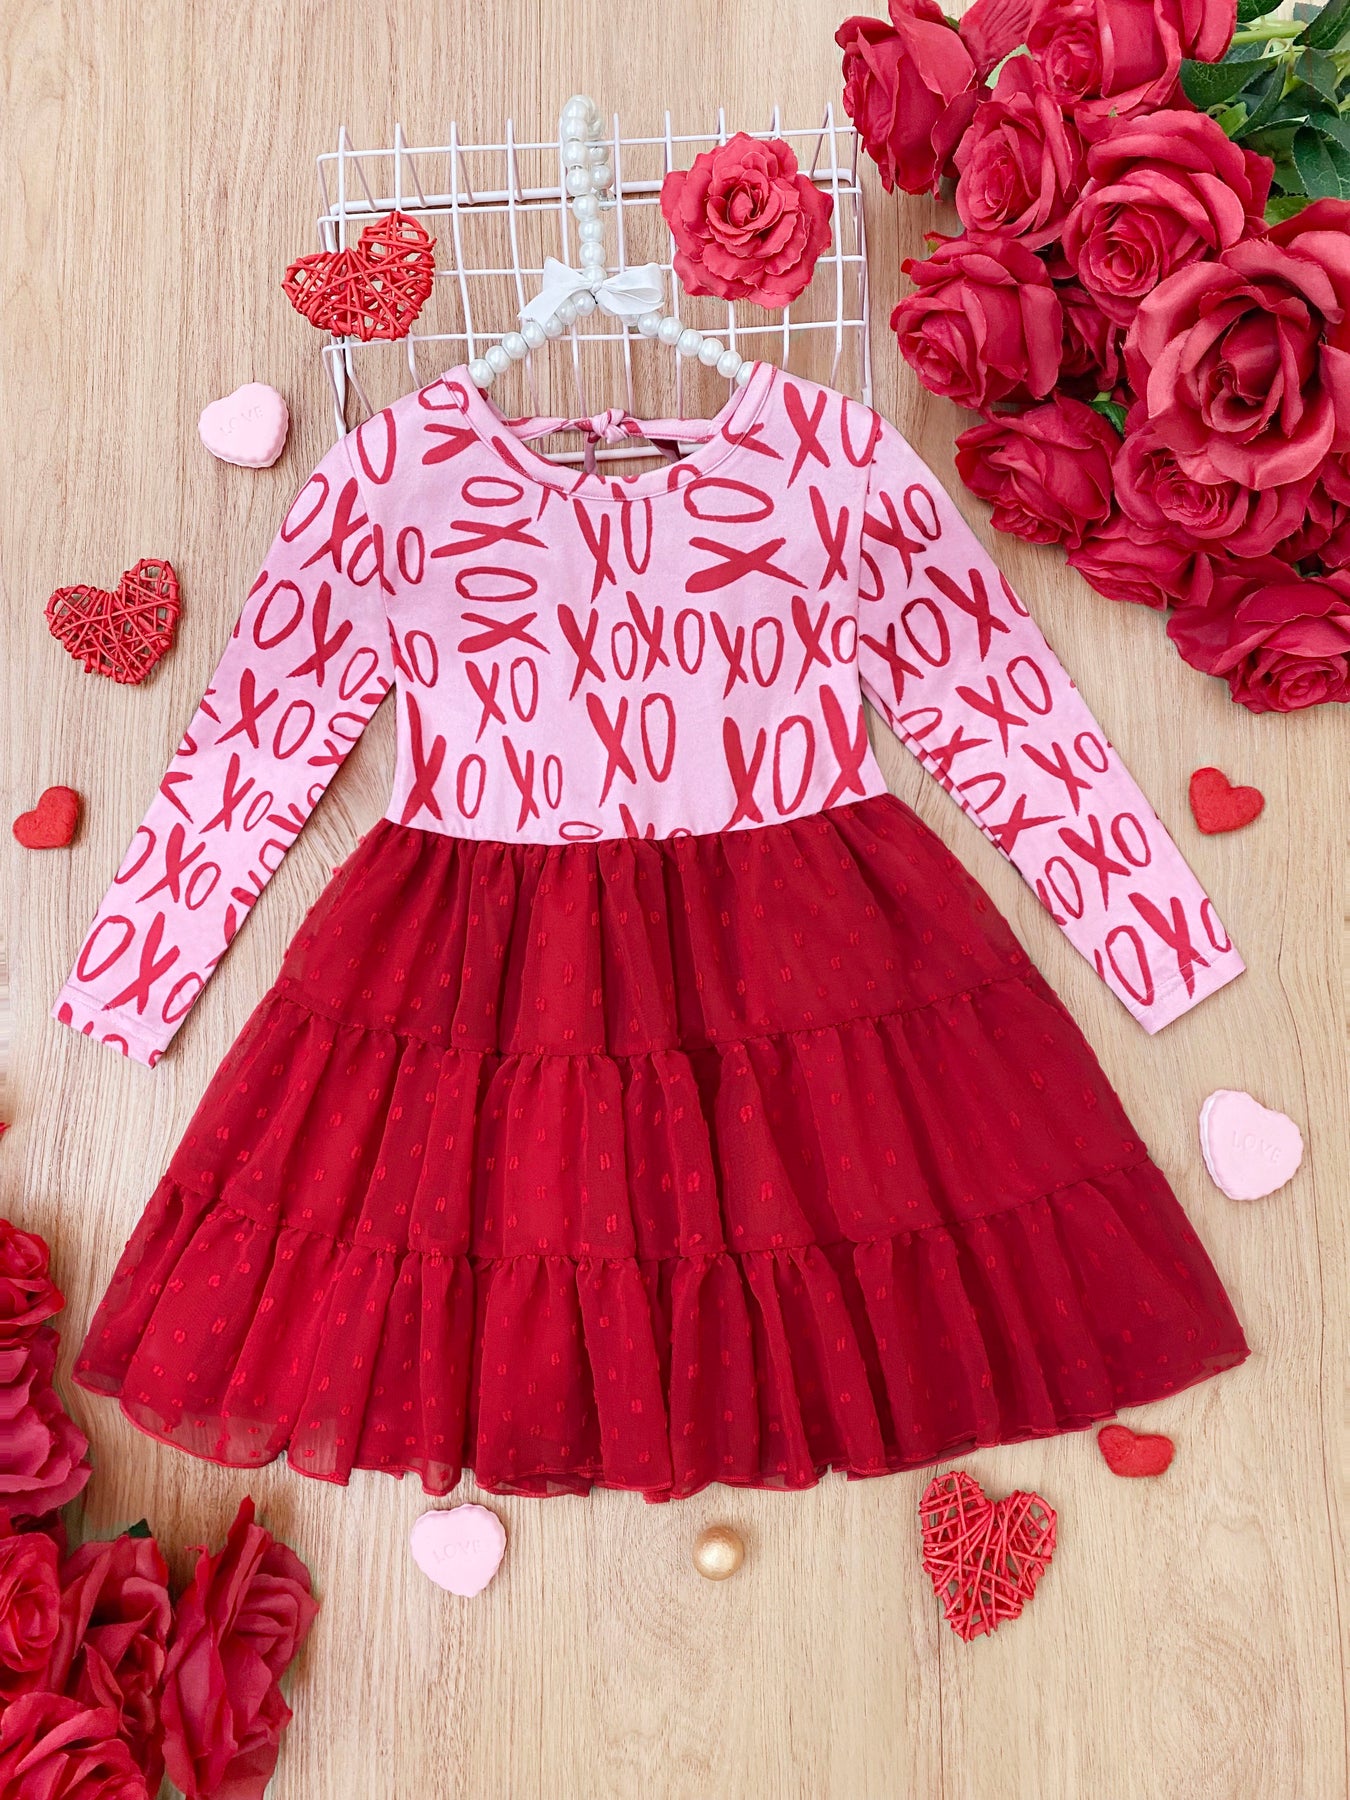 Dressy Toddler Clothes | Girls XOXO Print Swiss Tulle Ruffle Dress ...